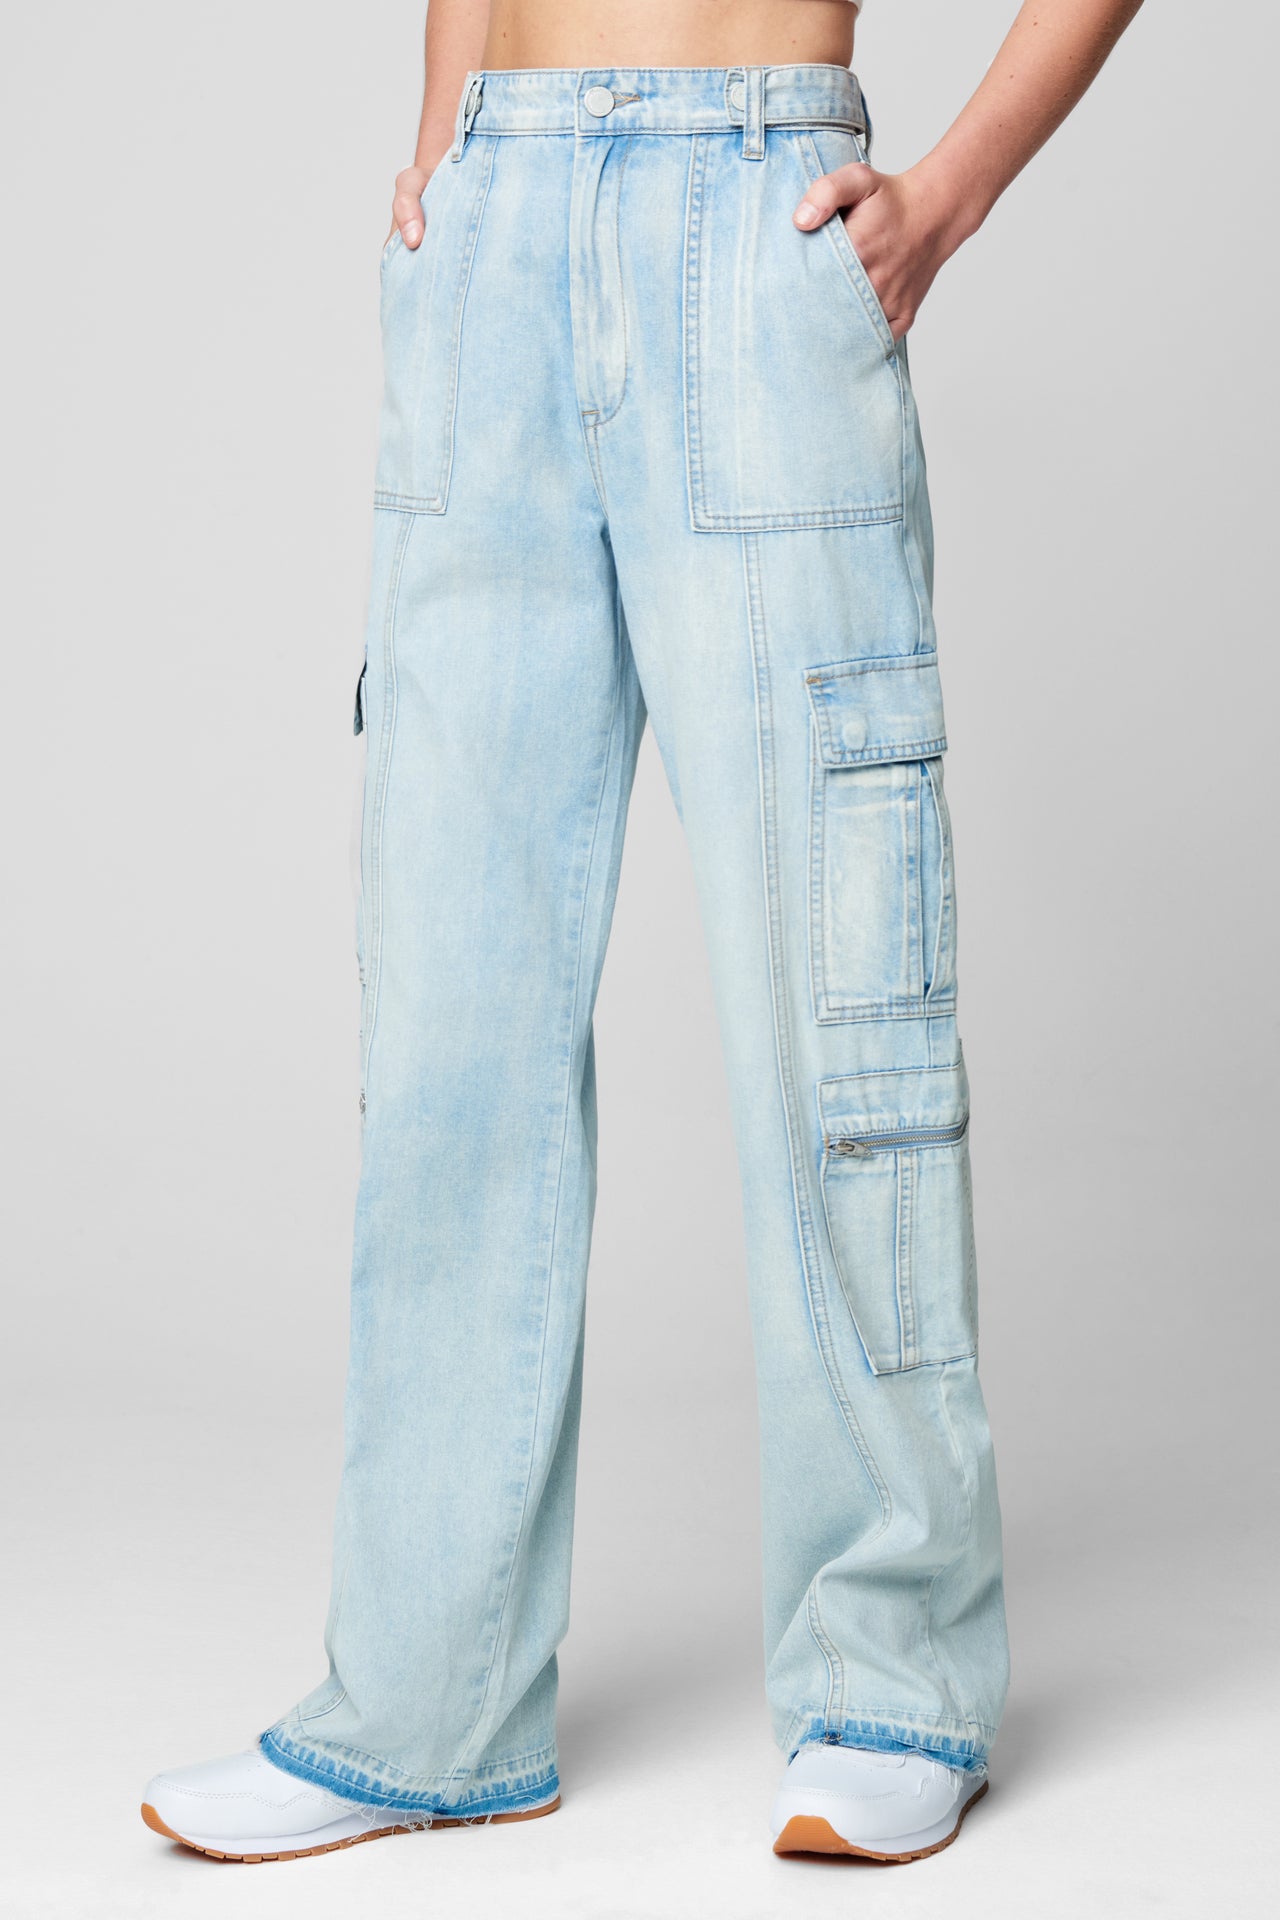 Call My Name | Blue Boutique LIT Cargo Pants